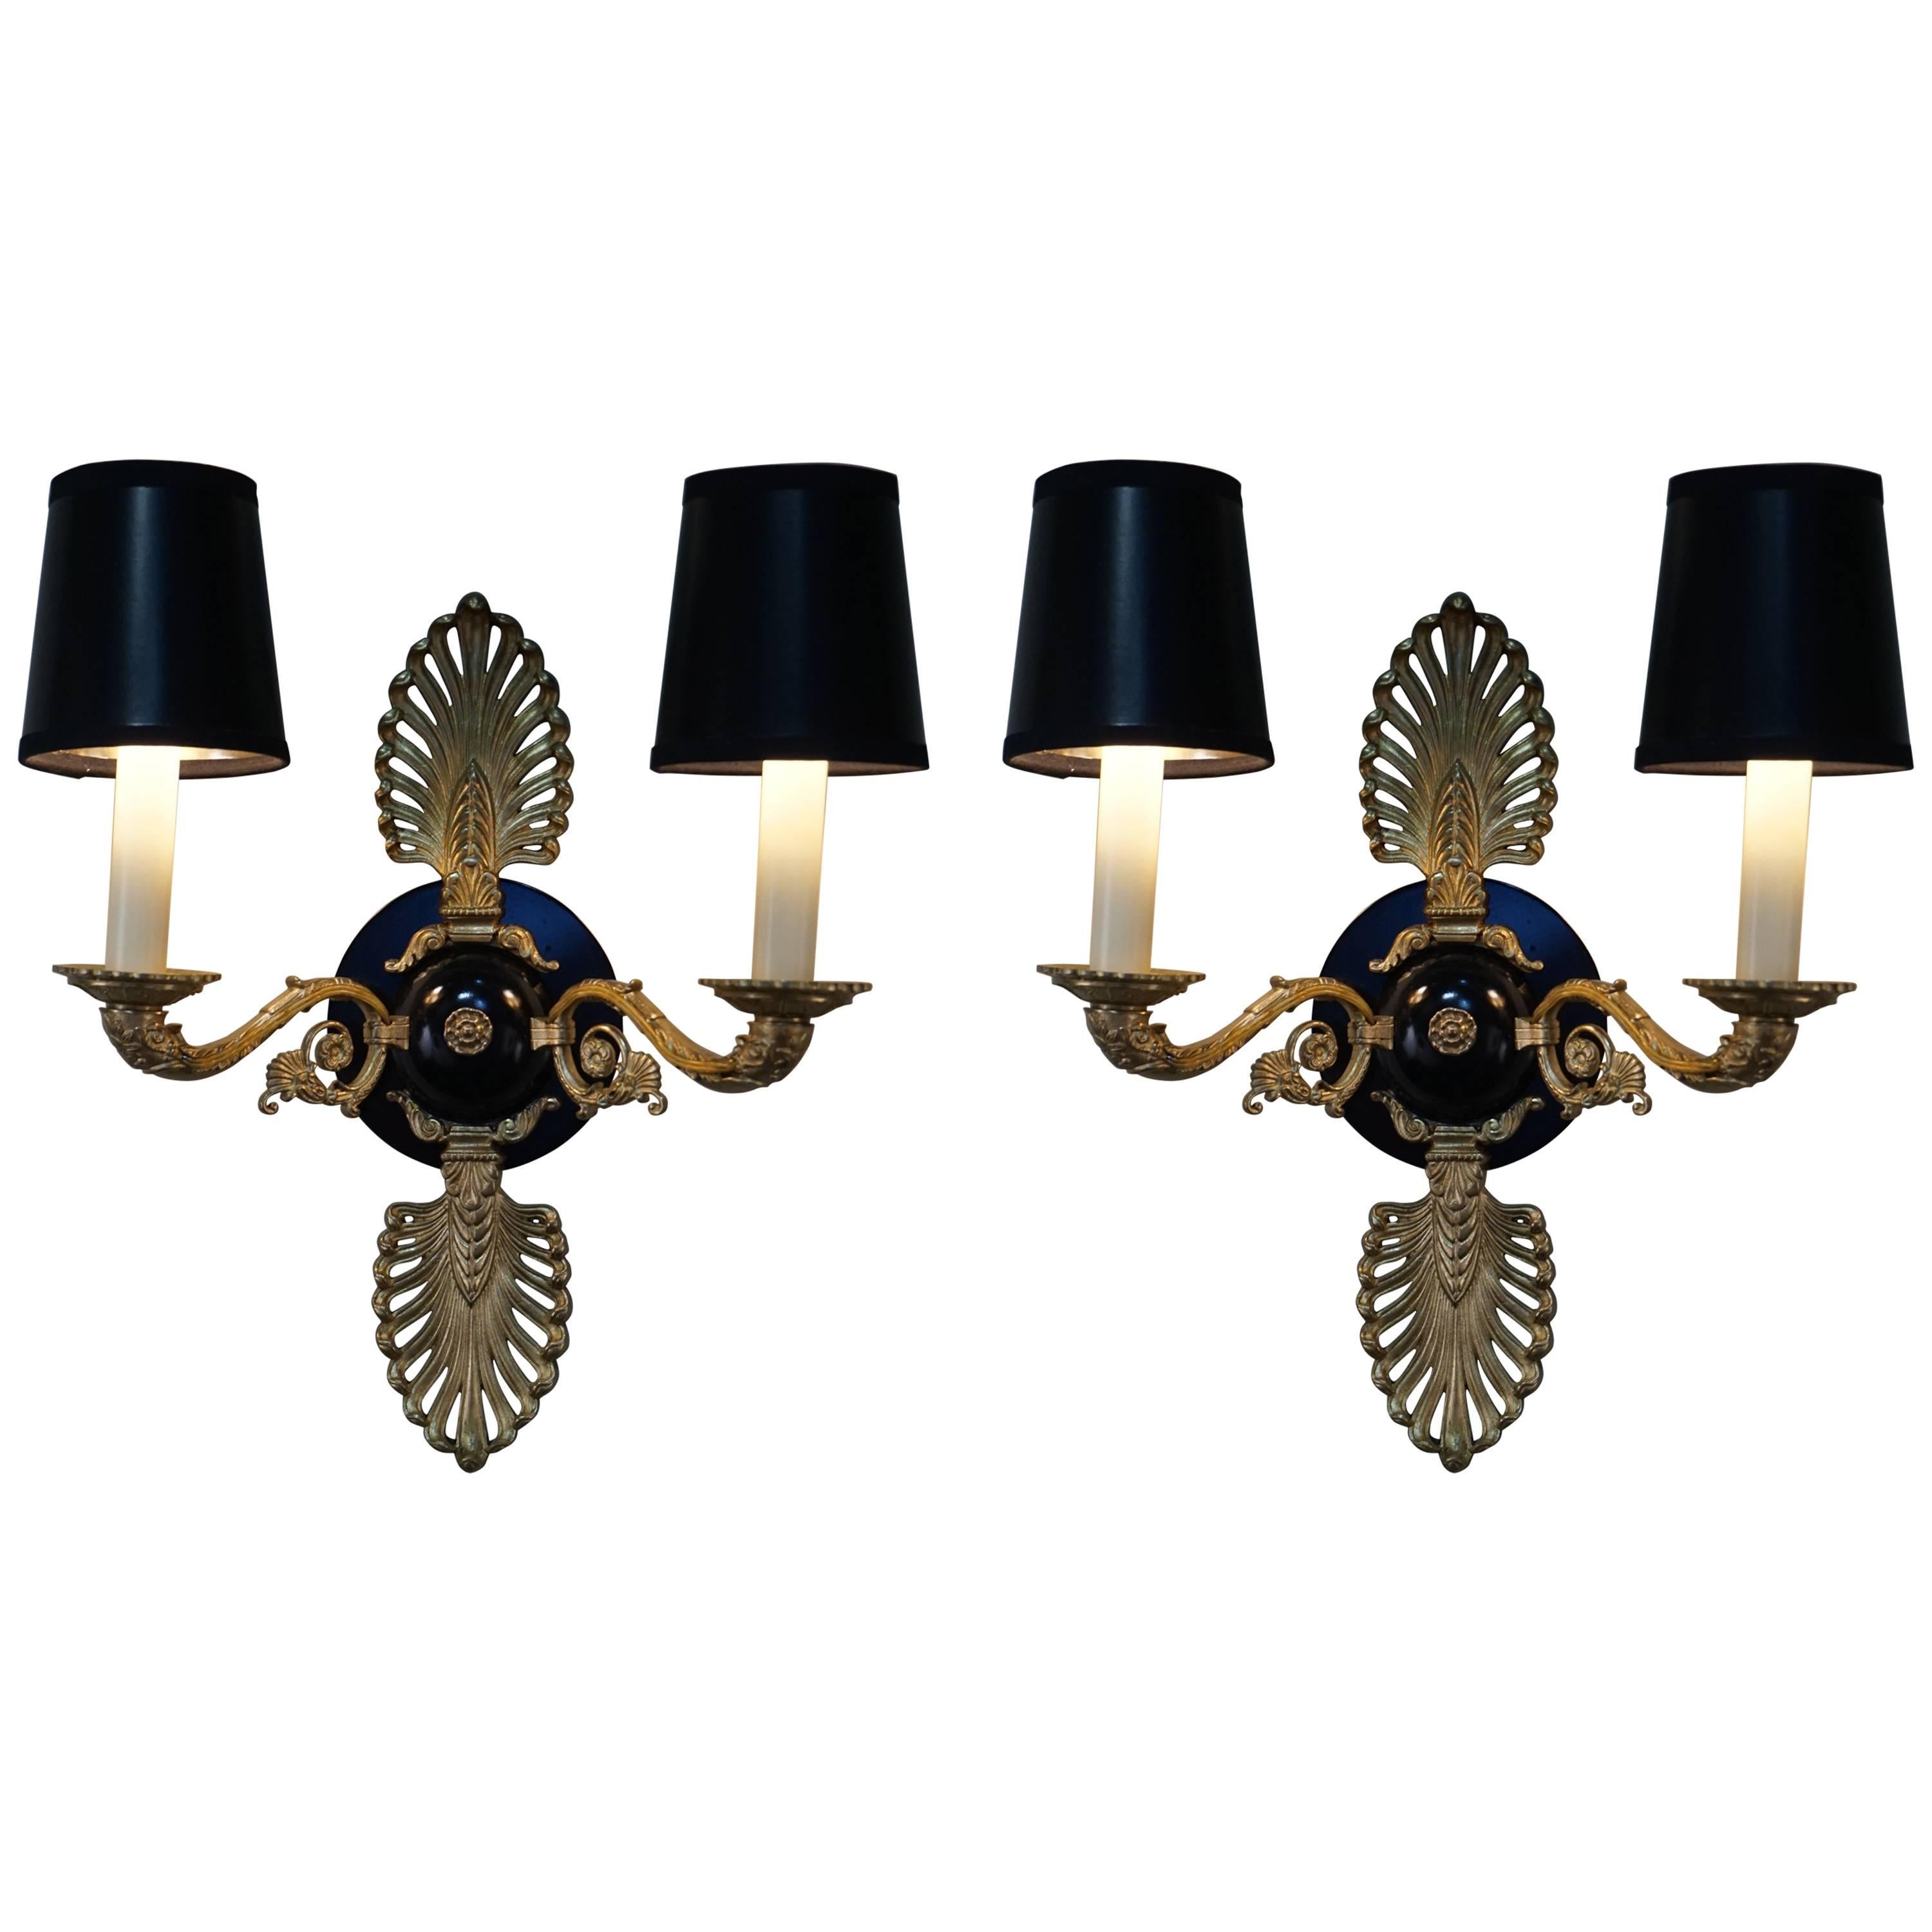 Pair of French Bronze Empire Style Wall Sconces